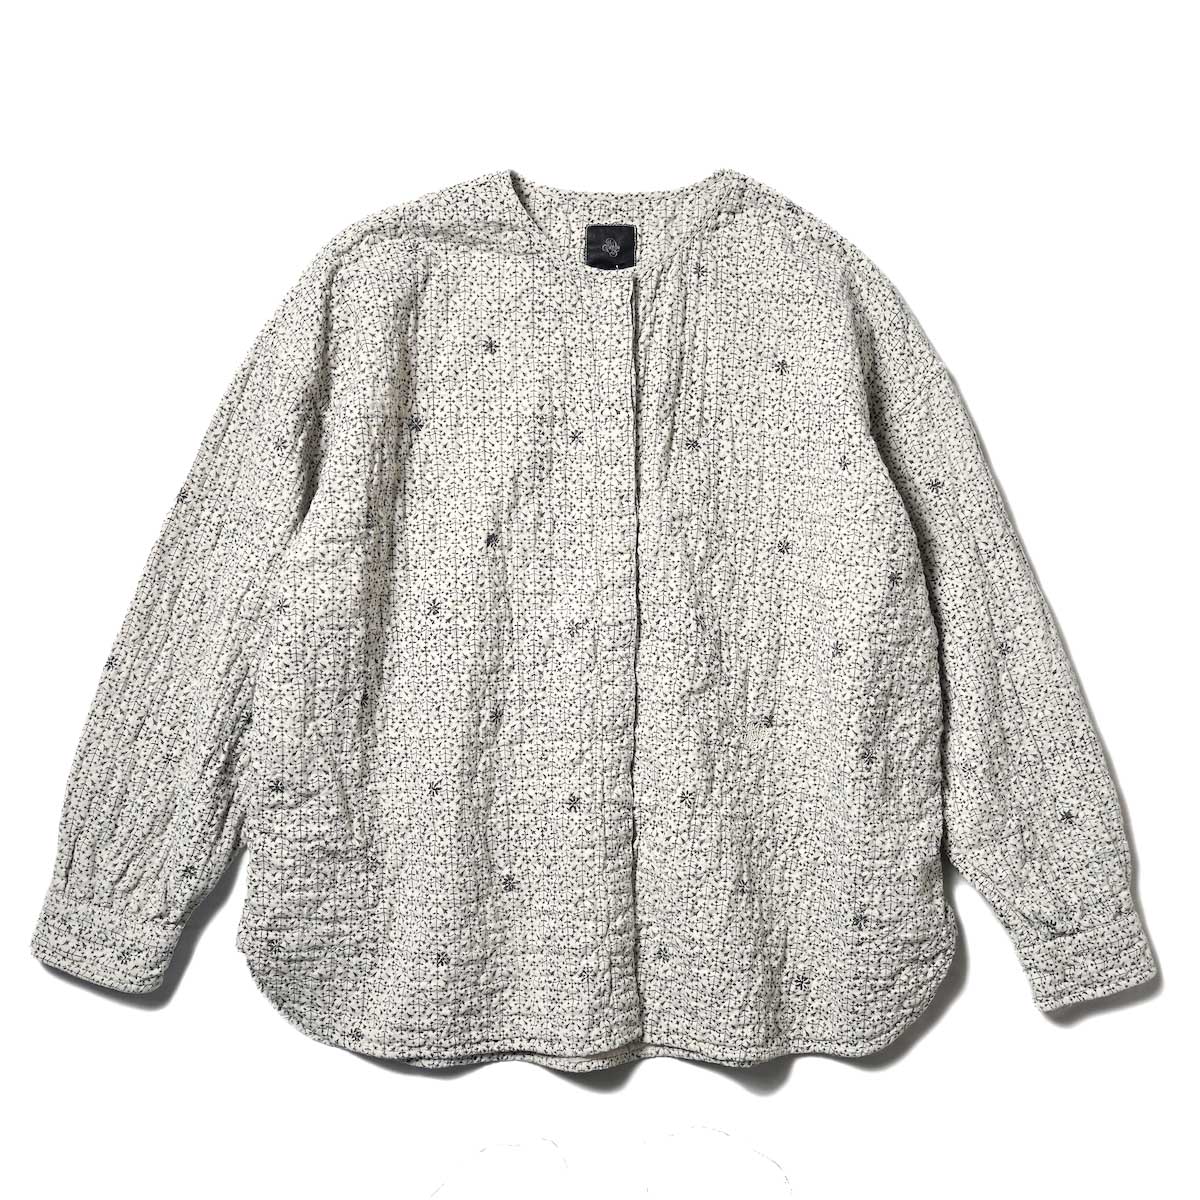 maison de soil / QUILTED ORGANIC COTTON BIG CHECK WITH LEAF BLOCK PRINT (OVER DYE) FLY FRONT CREW-NECK SHIRT (Milky Grey)